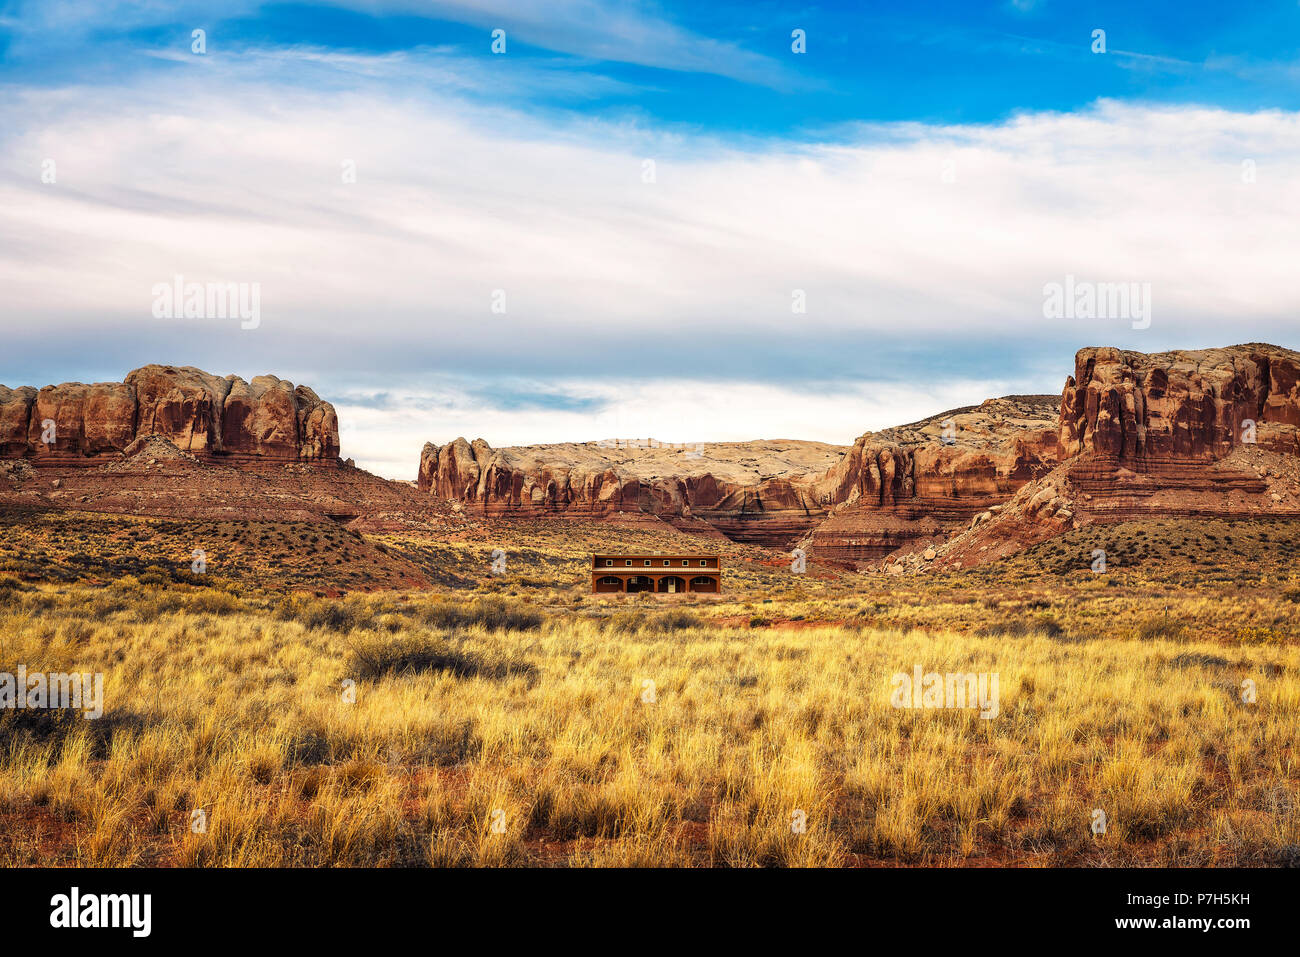 Old saloon in a typical southwestern landscape near the village of Bluff, Utah Stock Photo